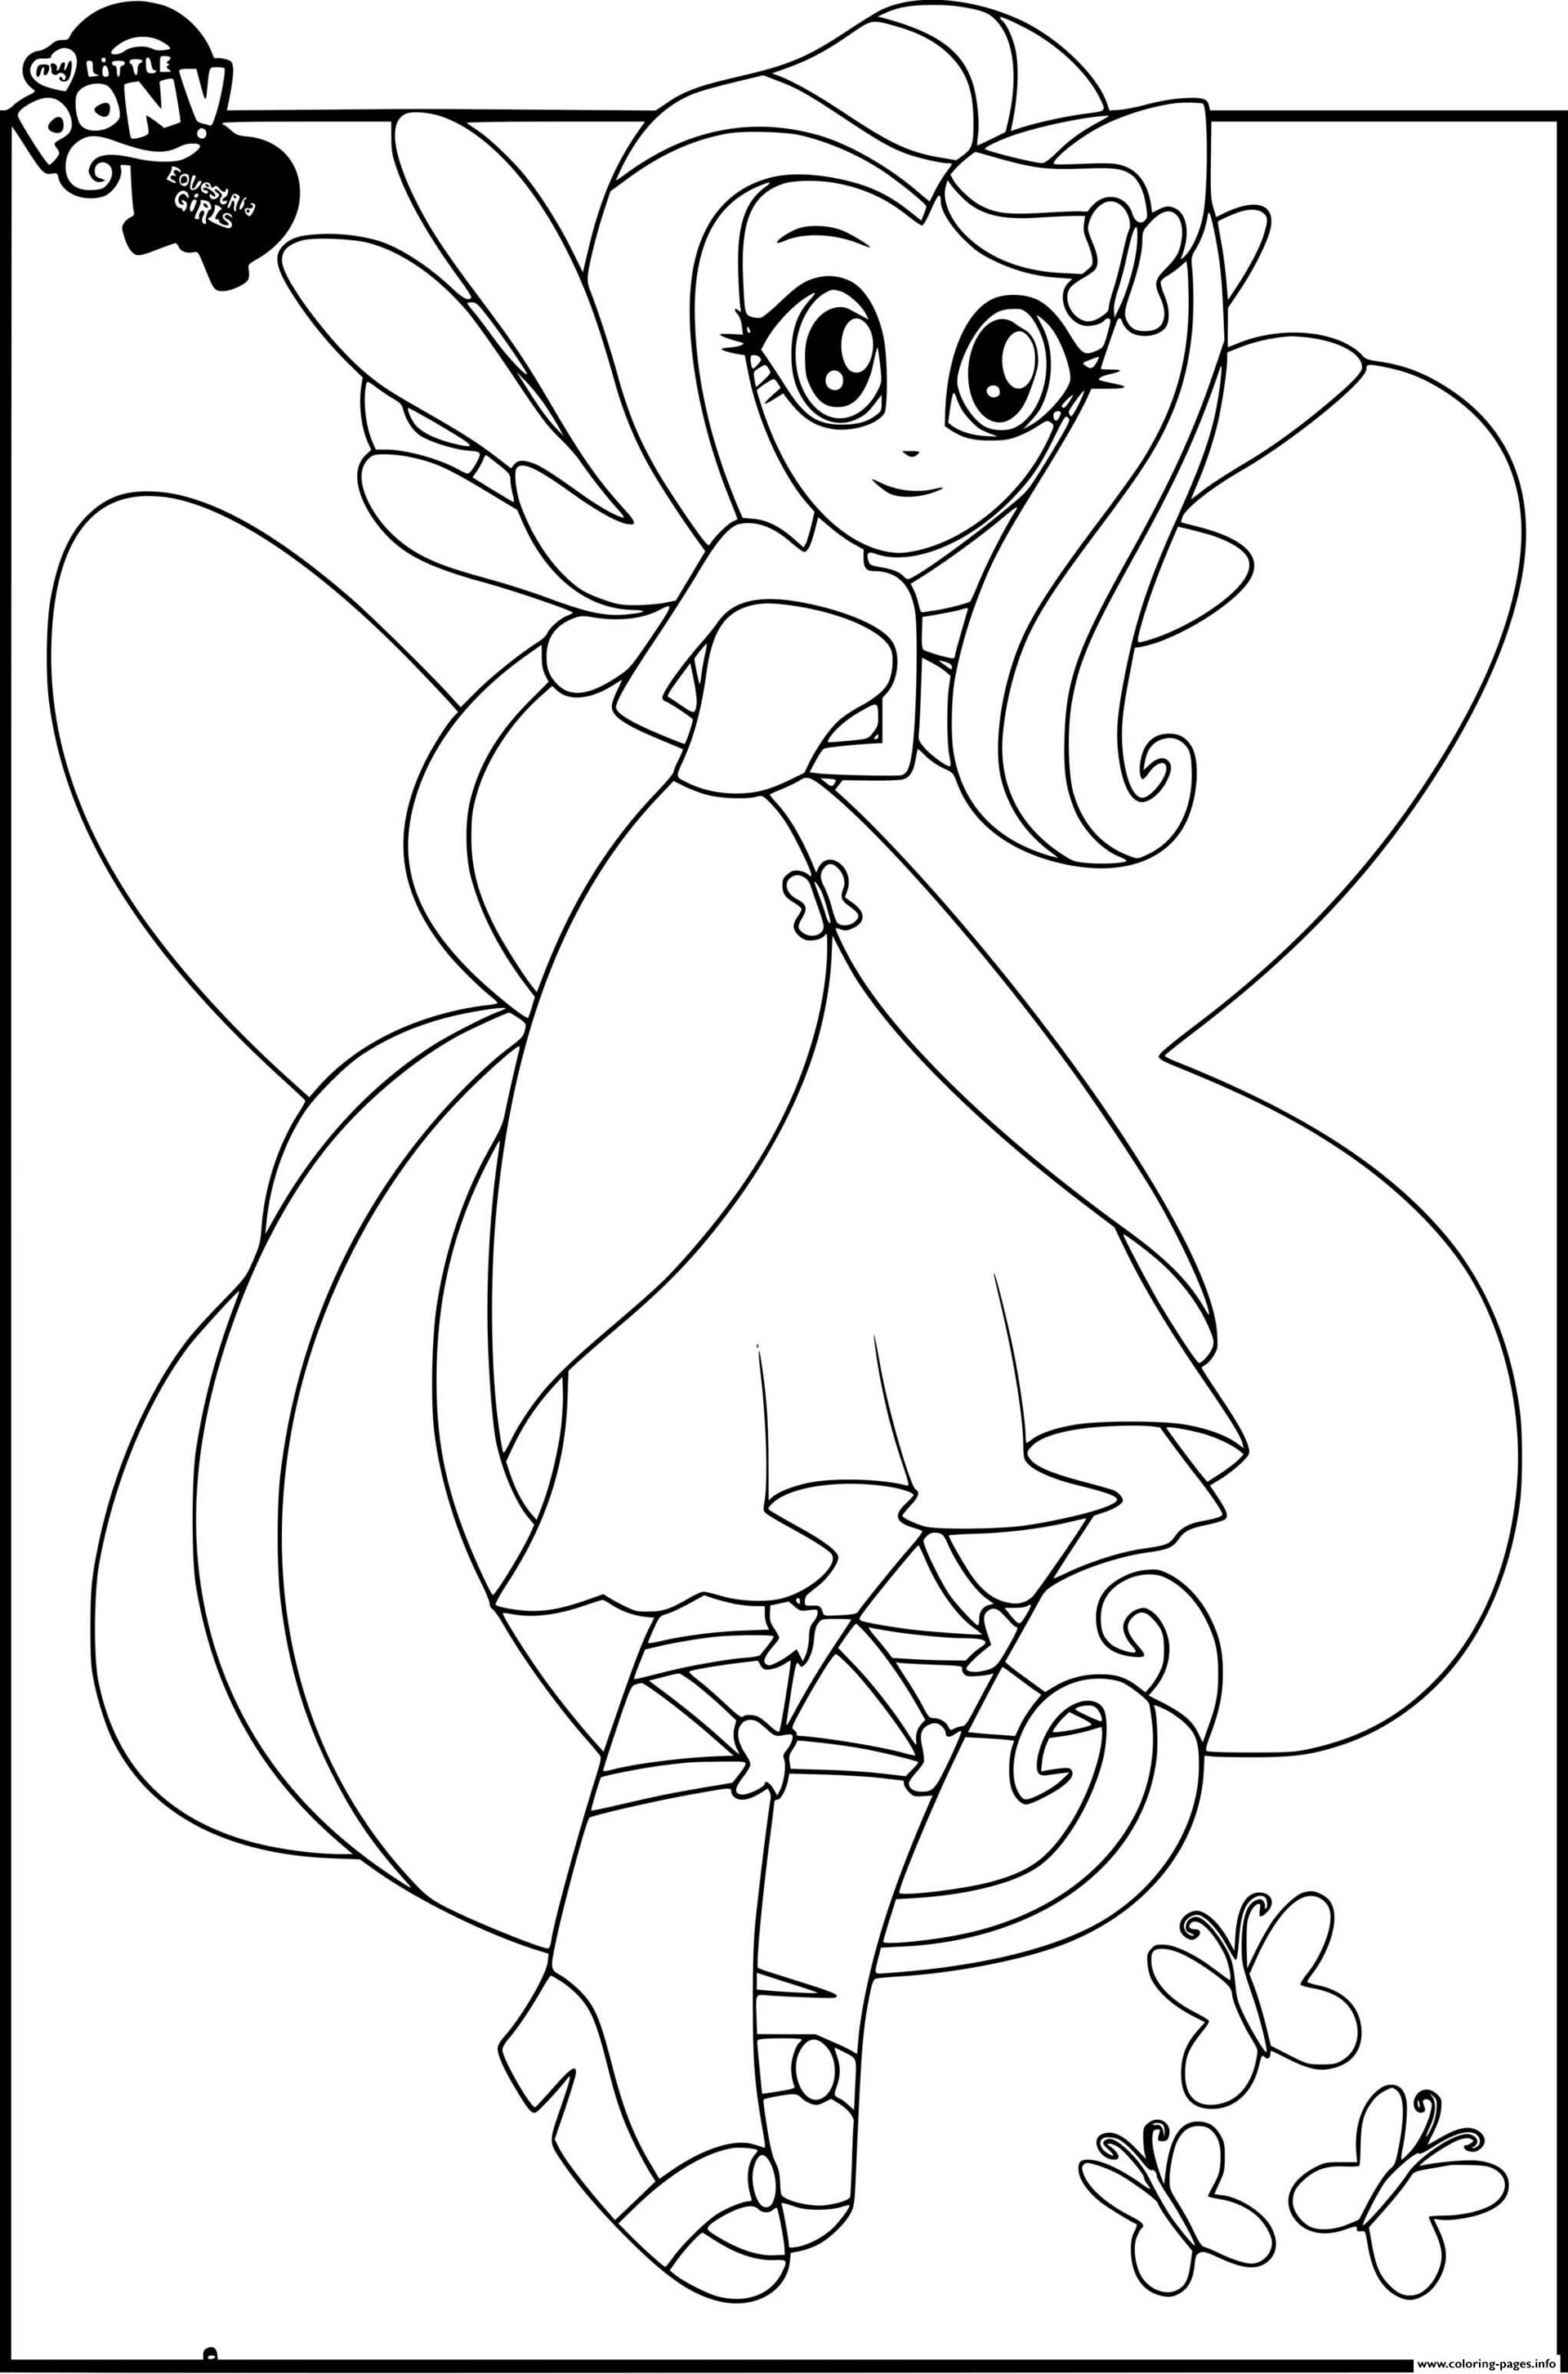 My Little Pony Equestria Girls Fluttershy Coloring Page Printable tout Coloriage My Little Pony